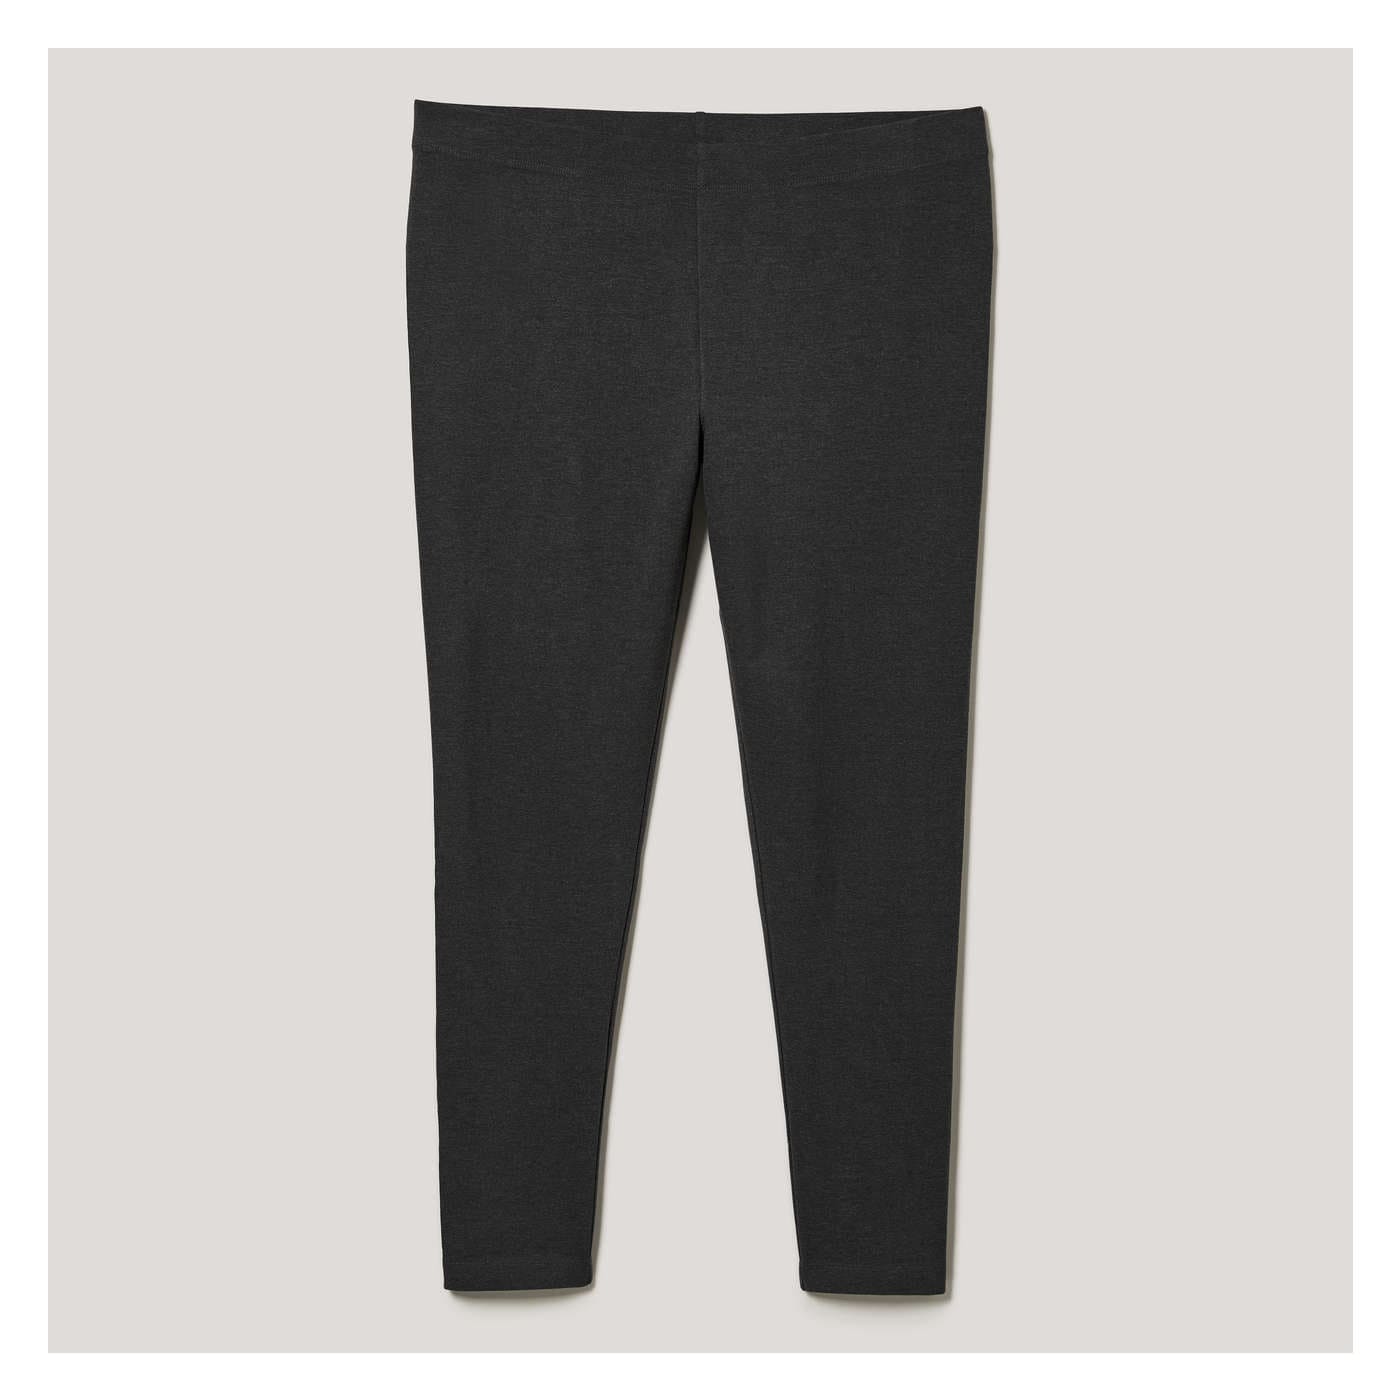 Toddler Girls' Fleece Tights in Charcoal from Joe Fresh